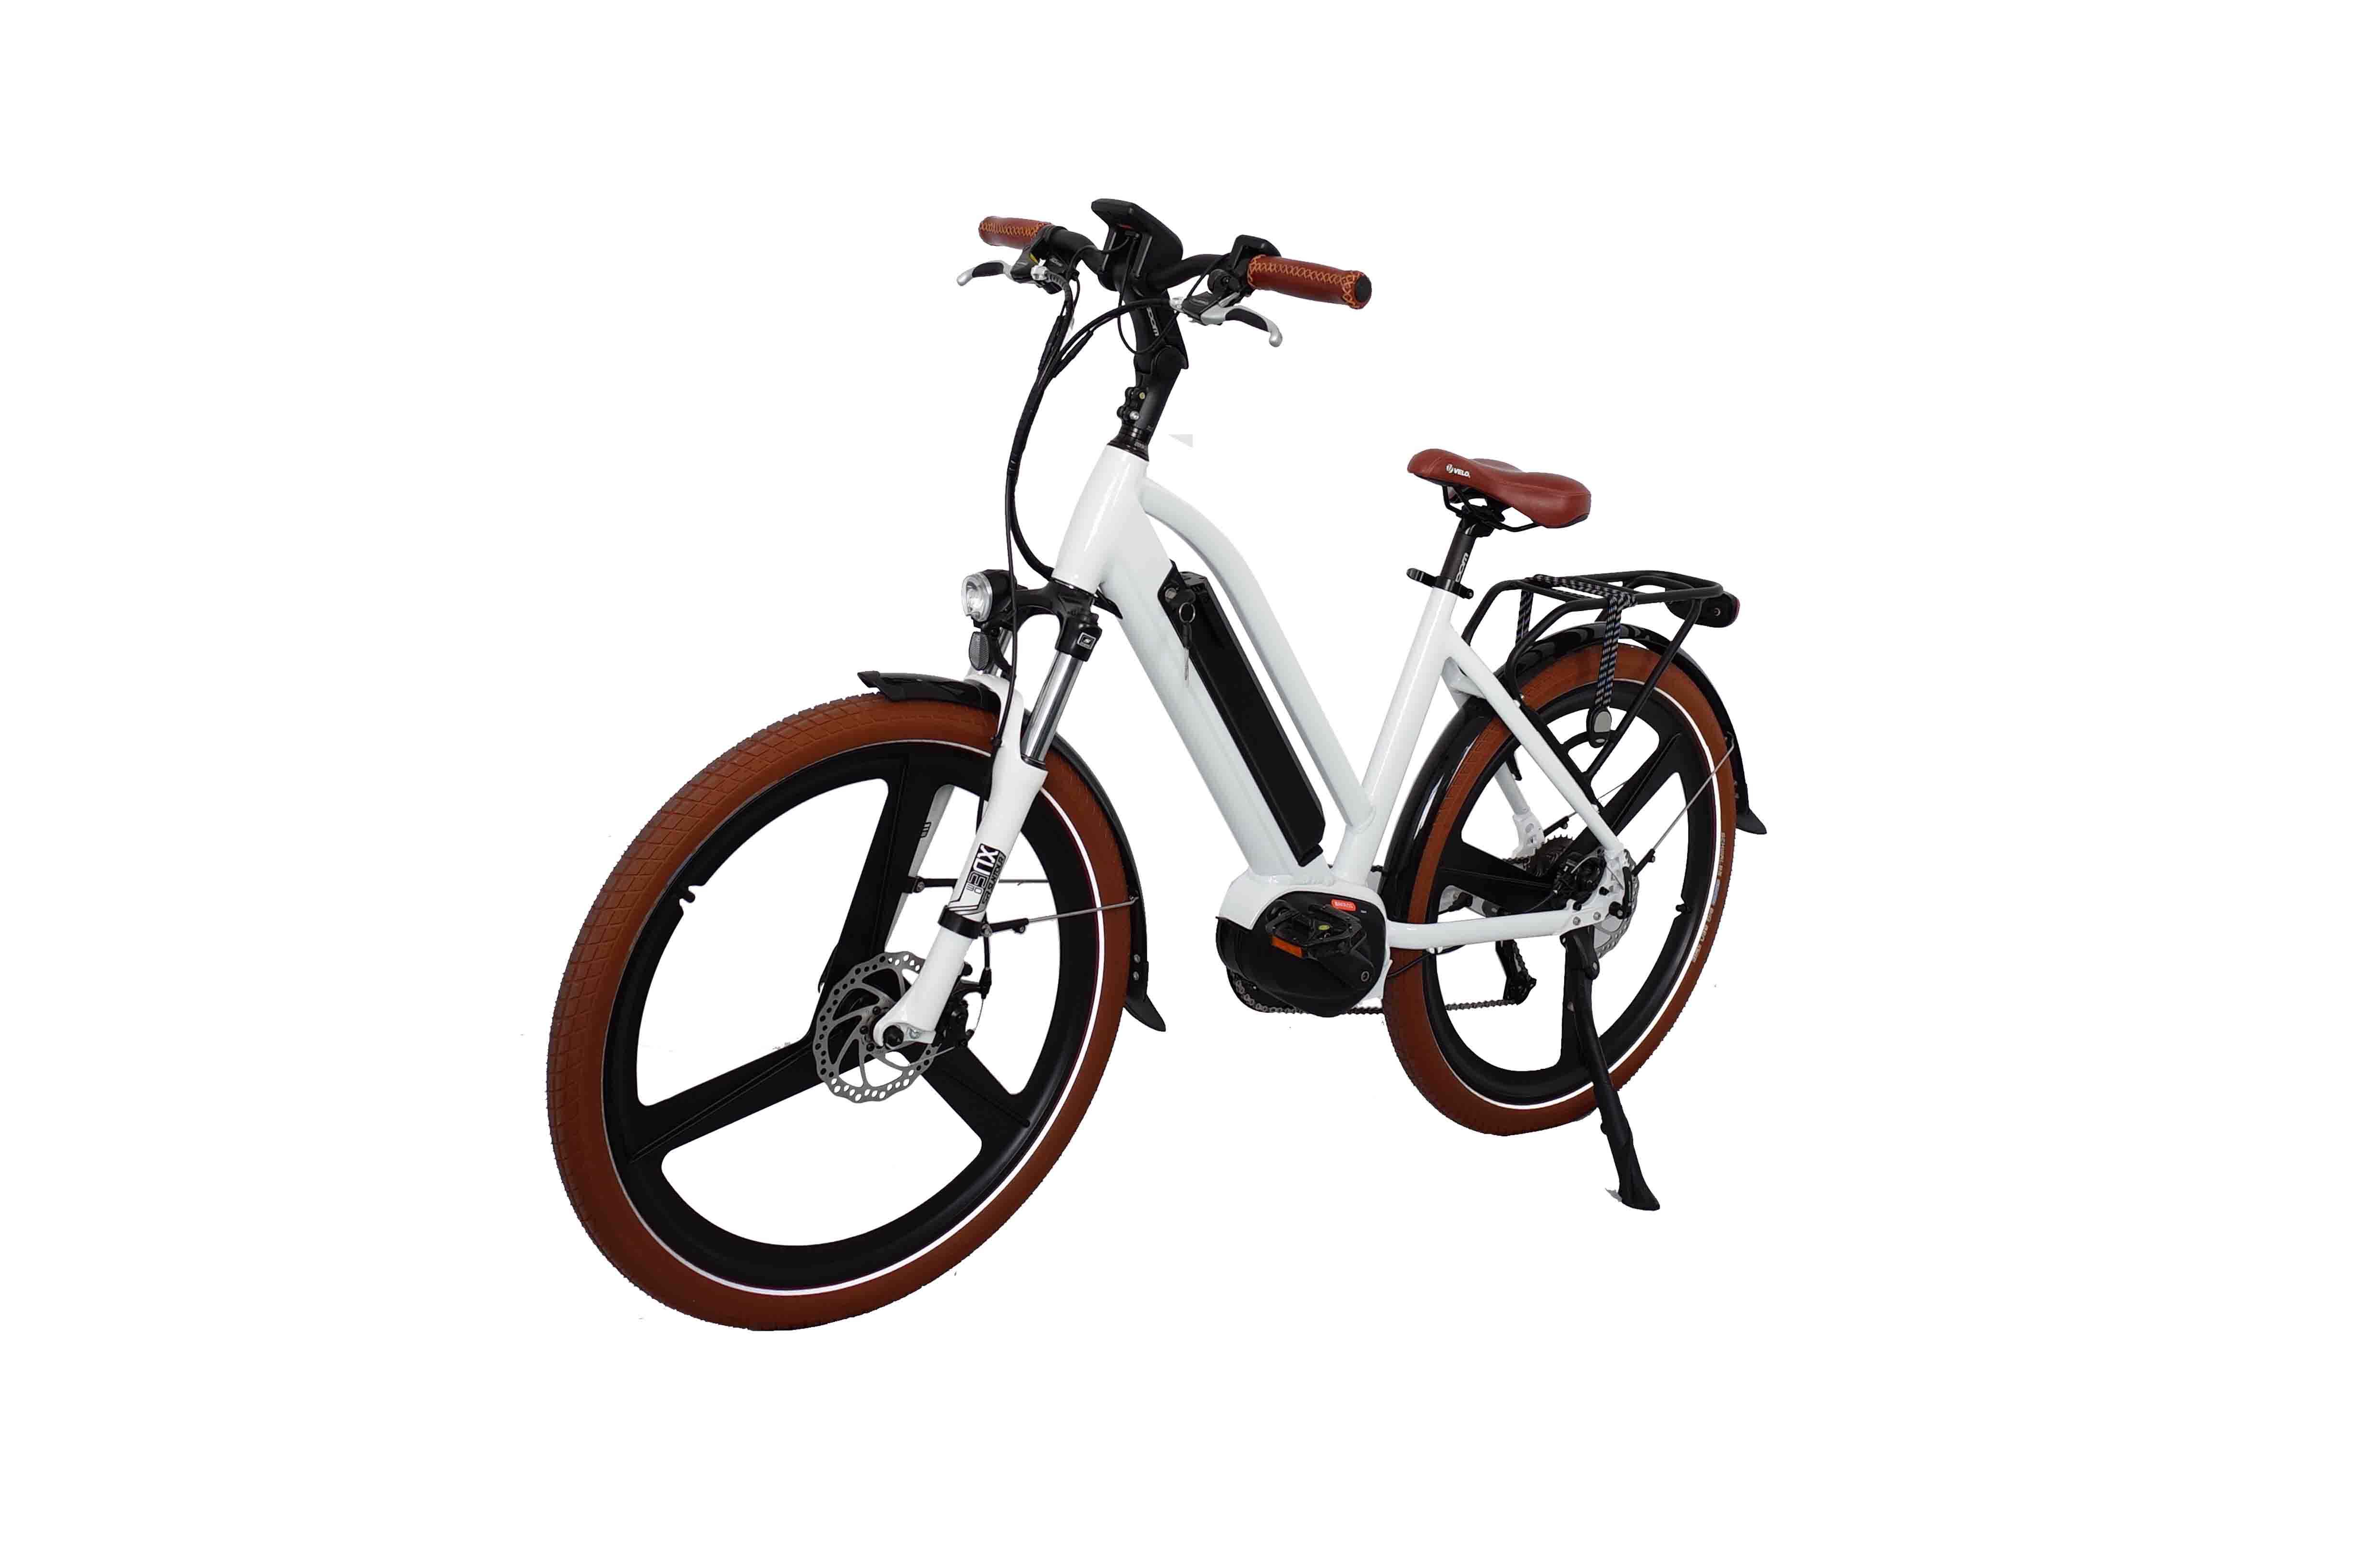 36v Battery Mid Drive Electric Bicycle Made in China